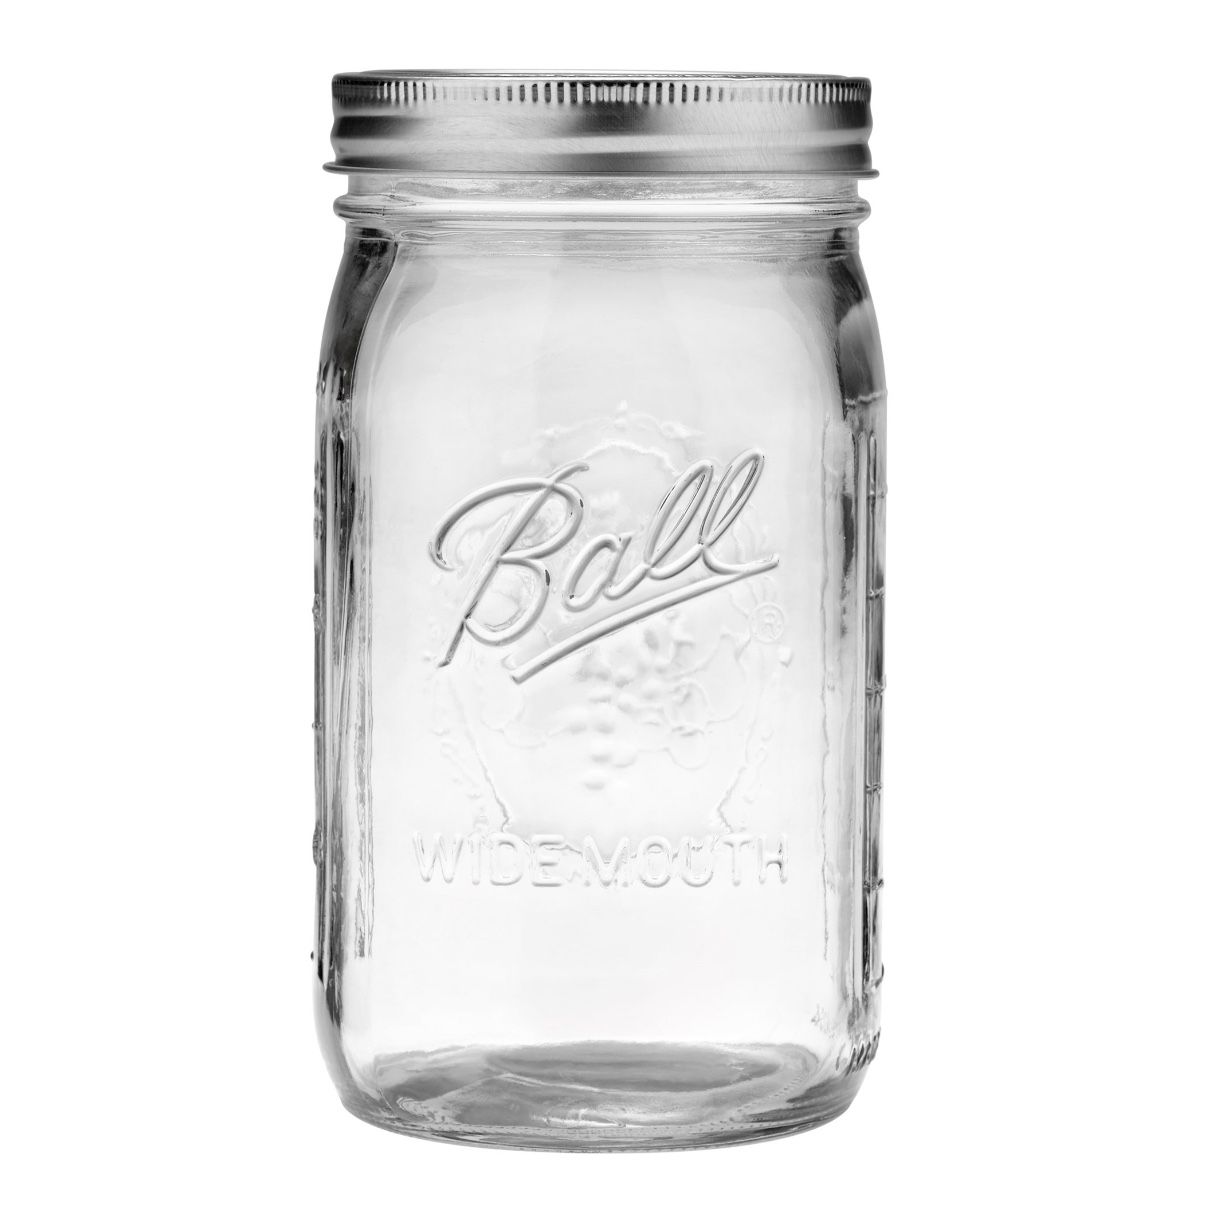 BALL 32oz Wide Mouth Quart Canning Mason Jars, Lids Bands Clear Glass 12 Pack. Condition is "New and sealed.